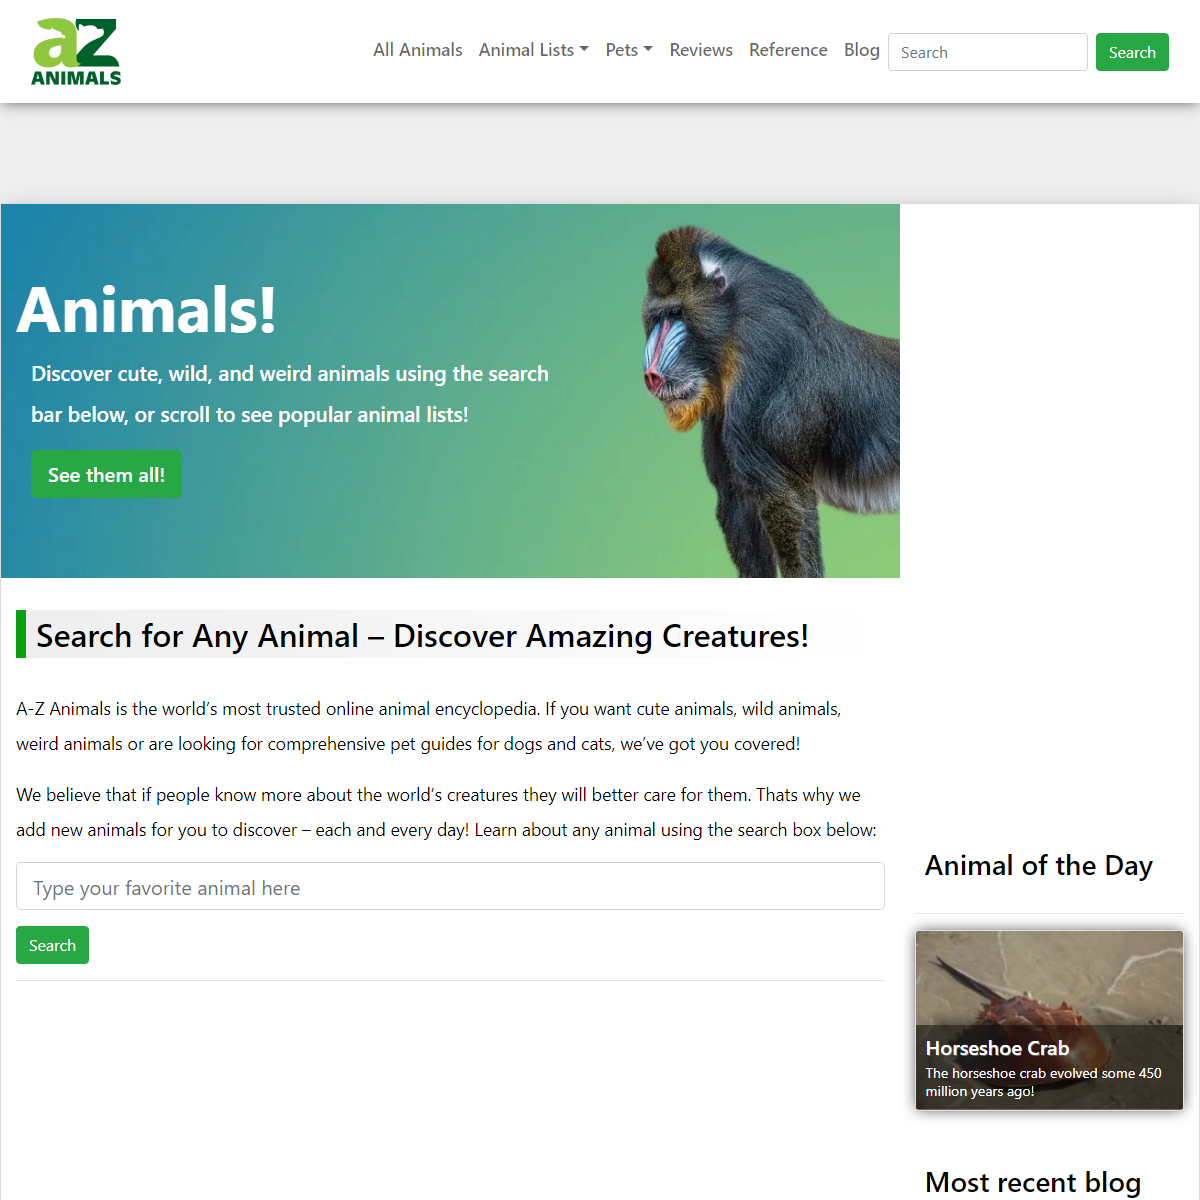 A complete backup of https://a-z-animals.com/